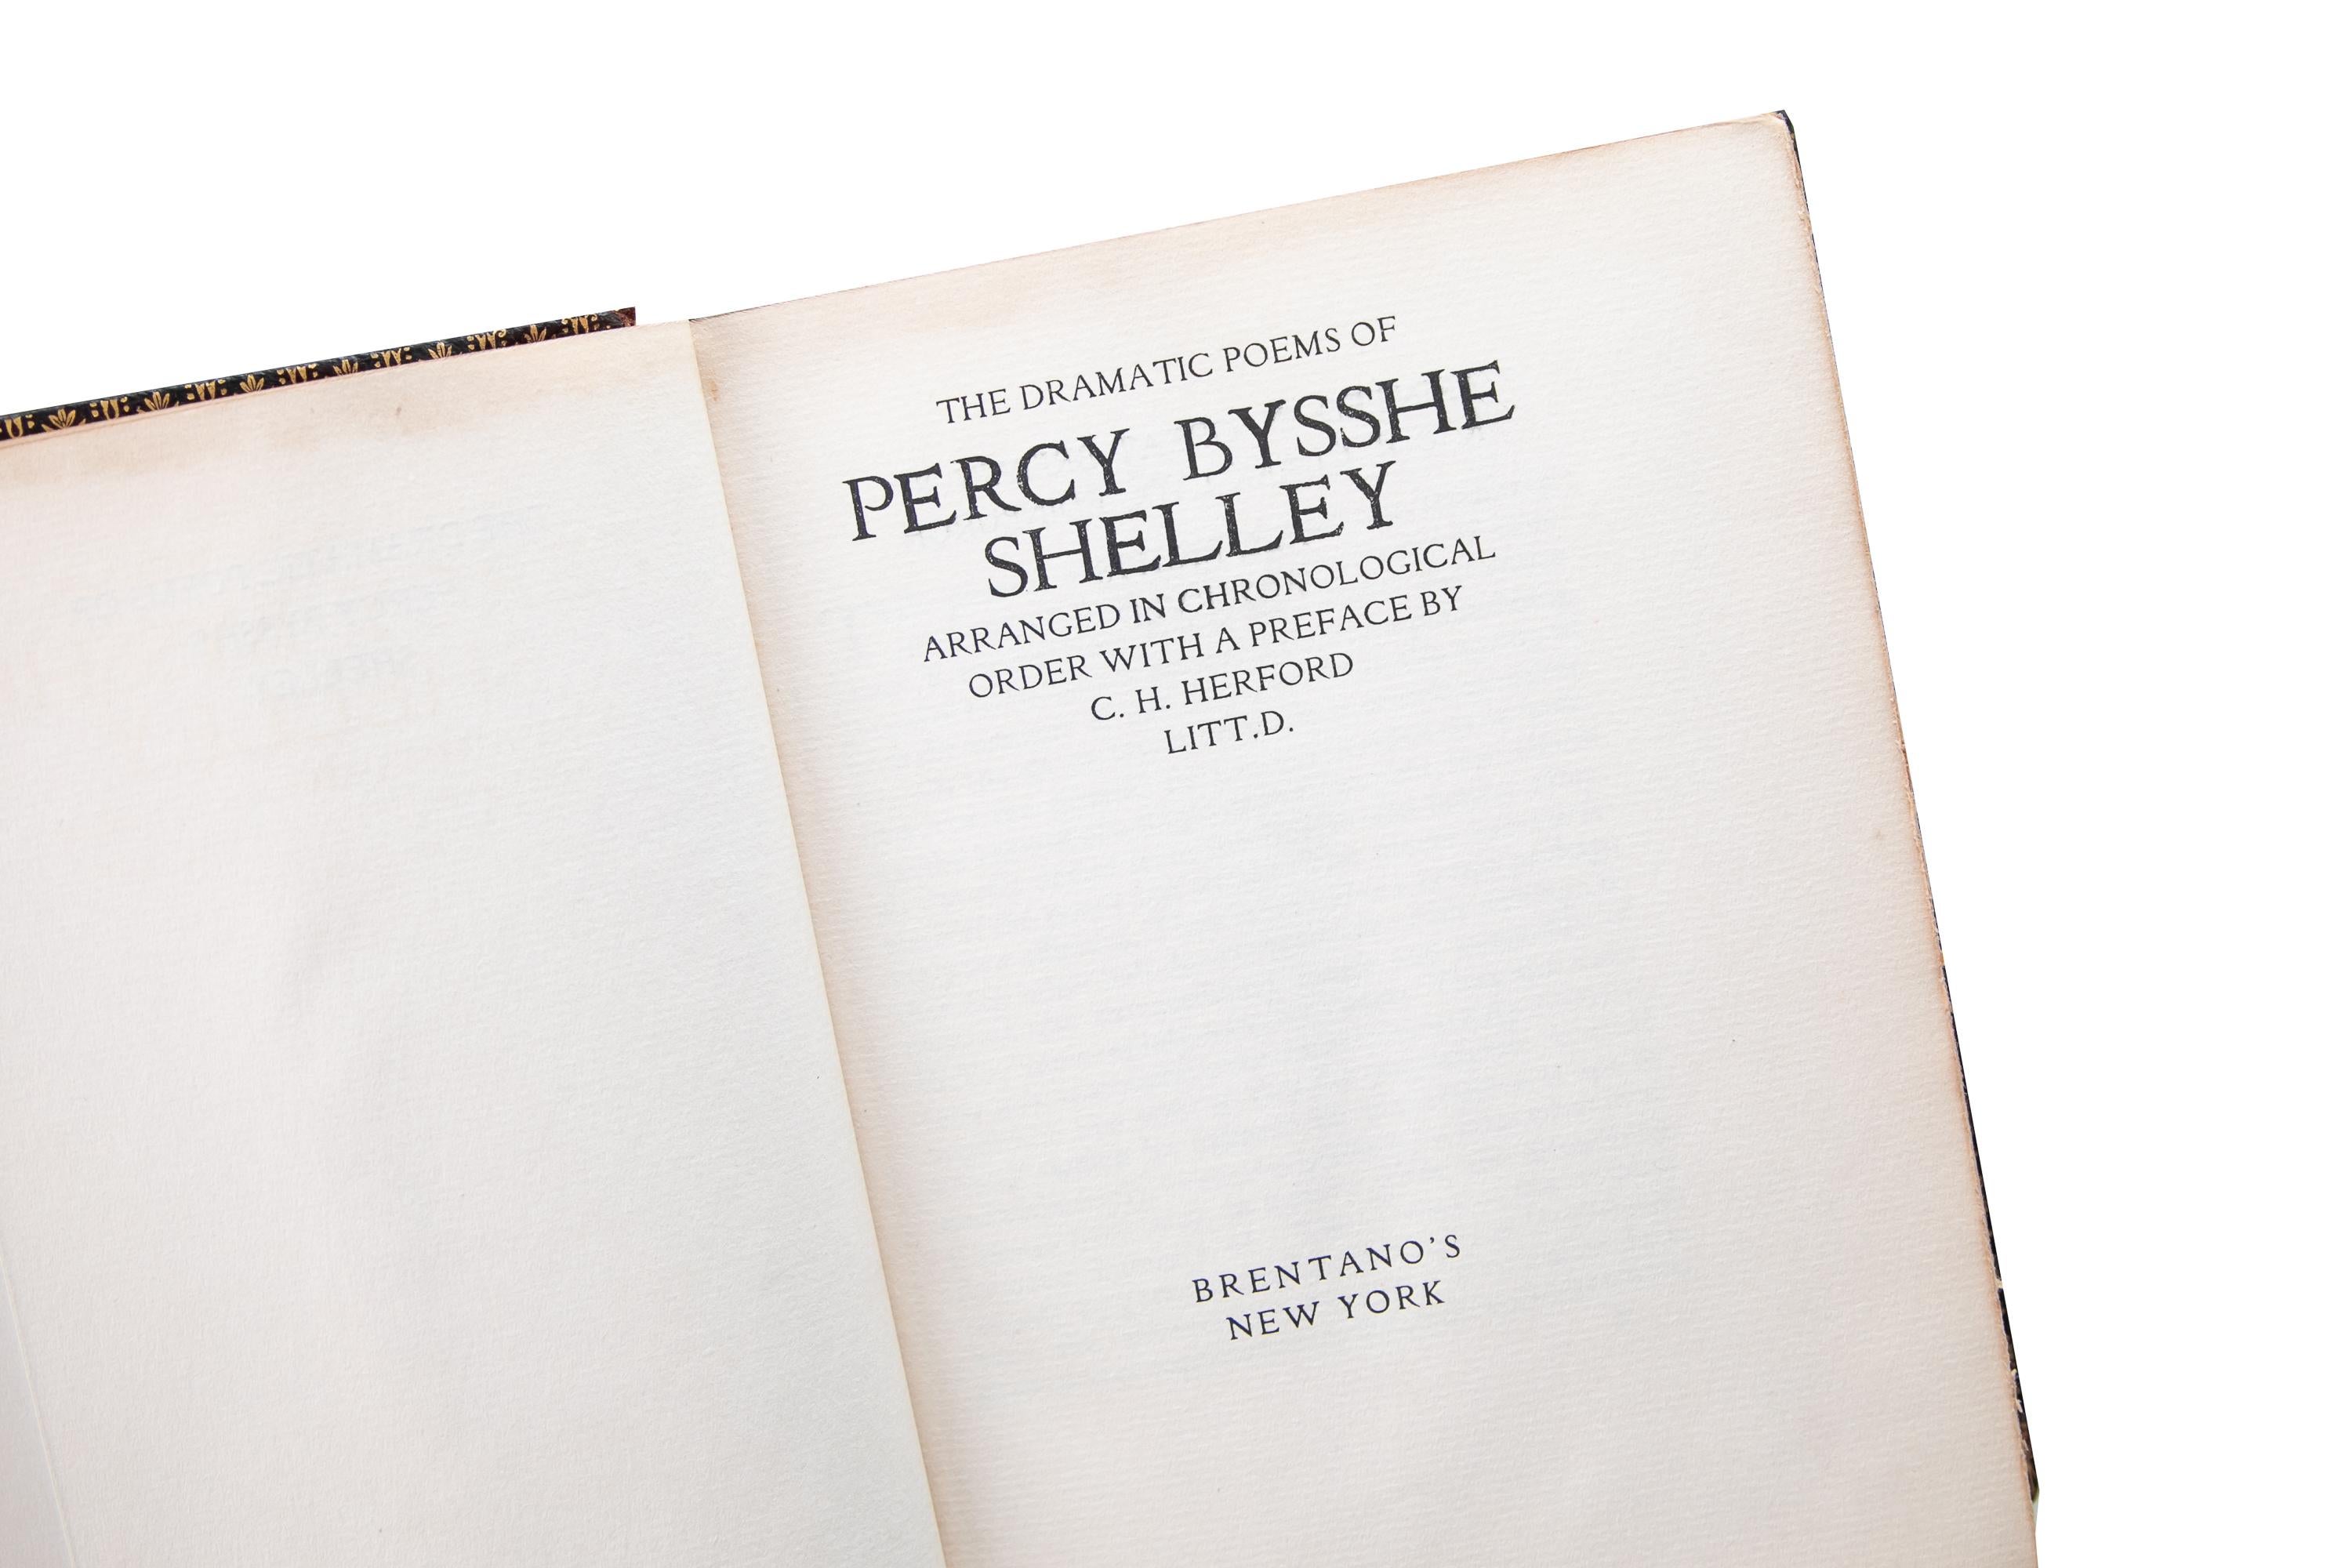 American 1 Volume. Percy Bysshe Shelley, Dramatic Poems. For Sale